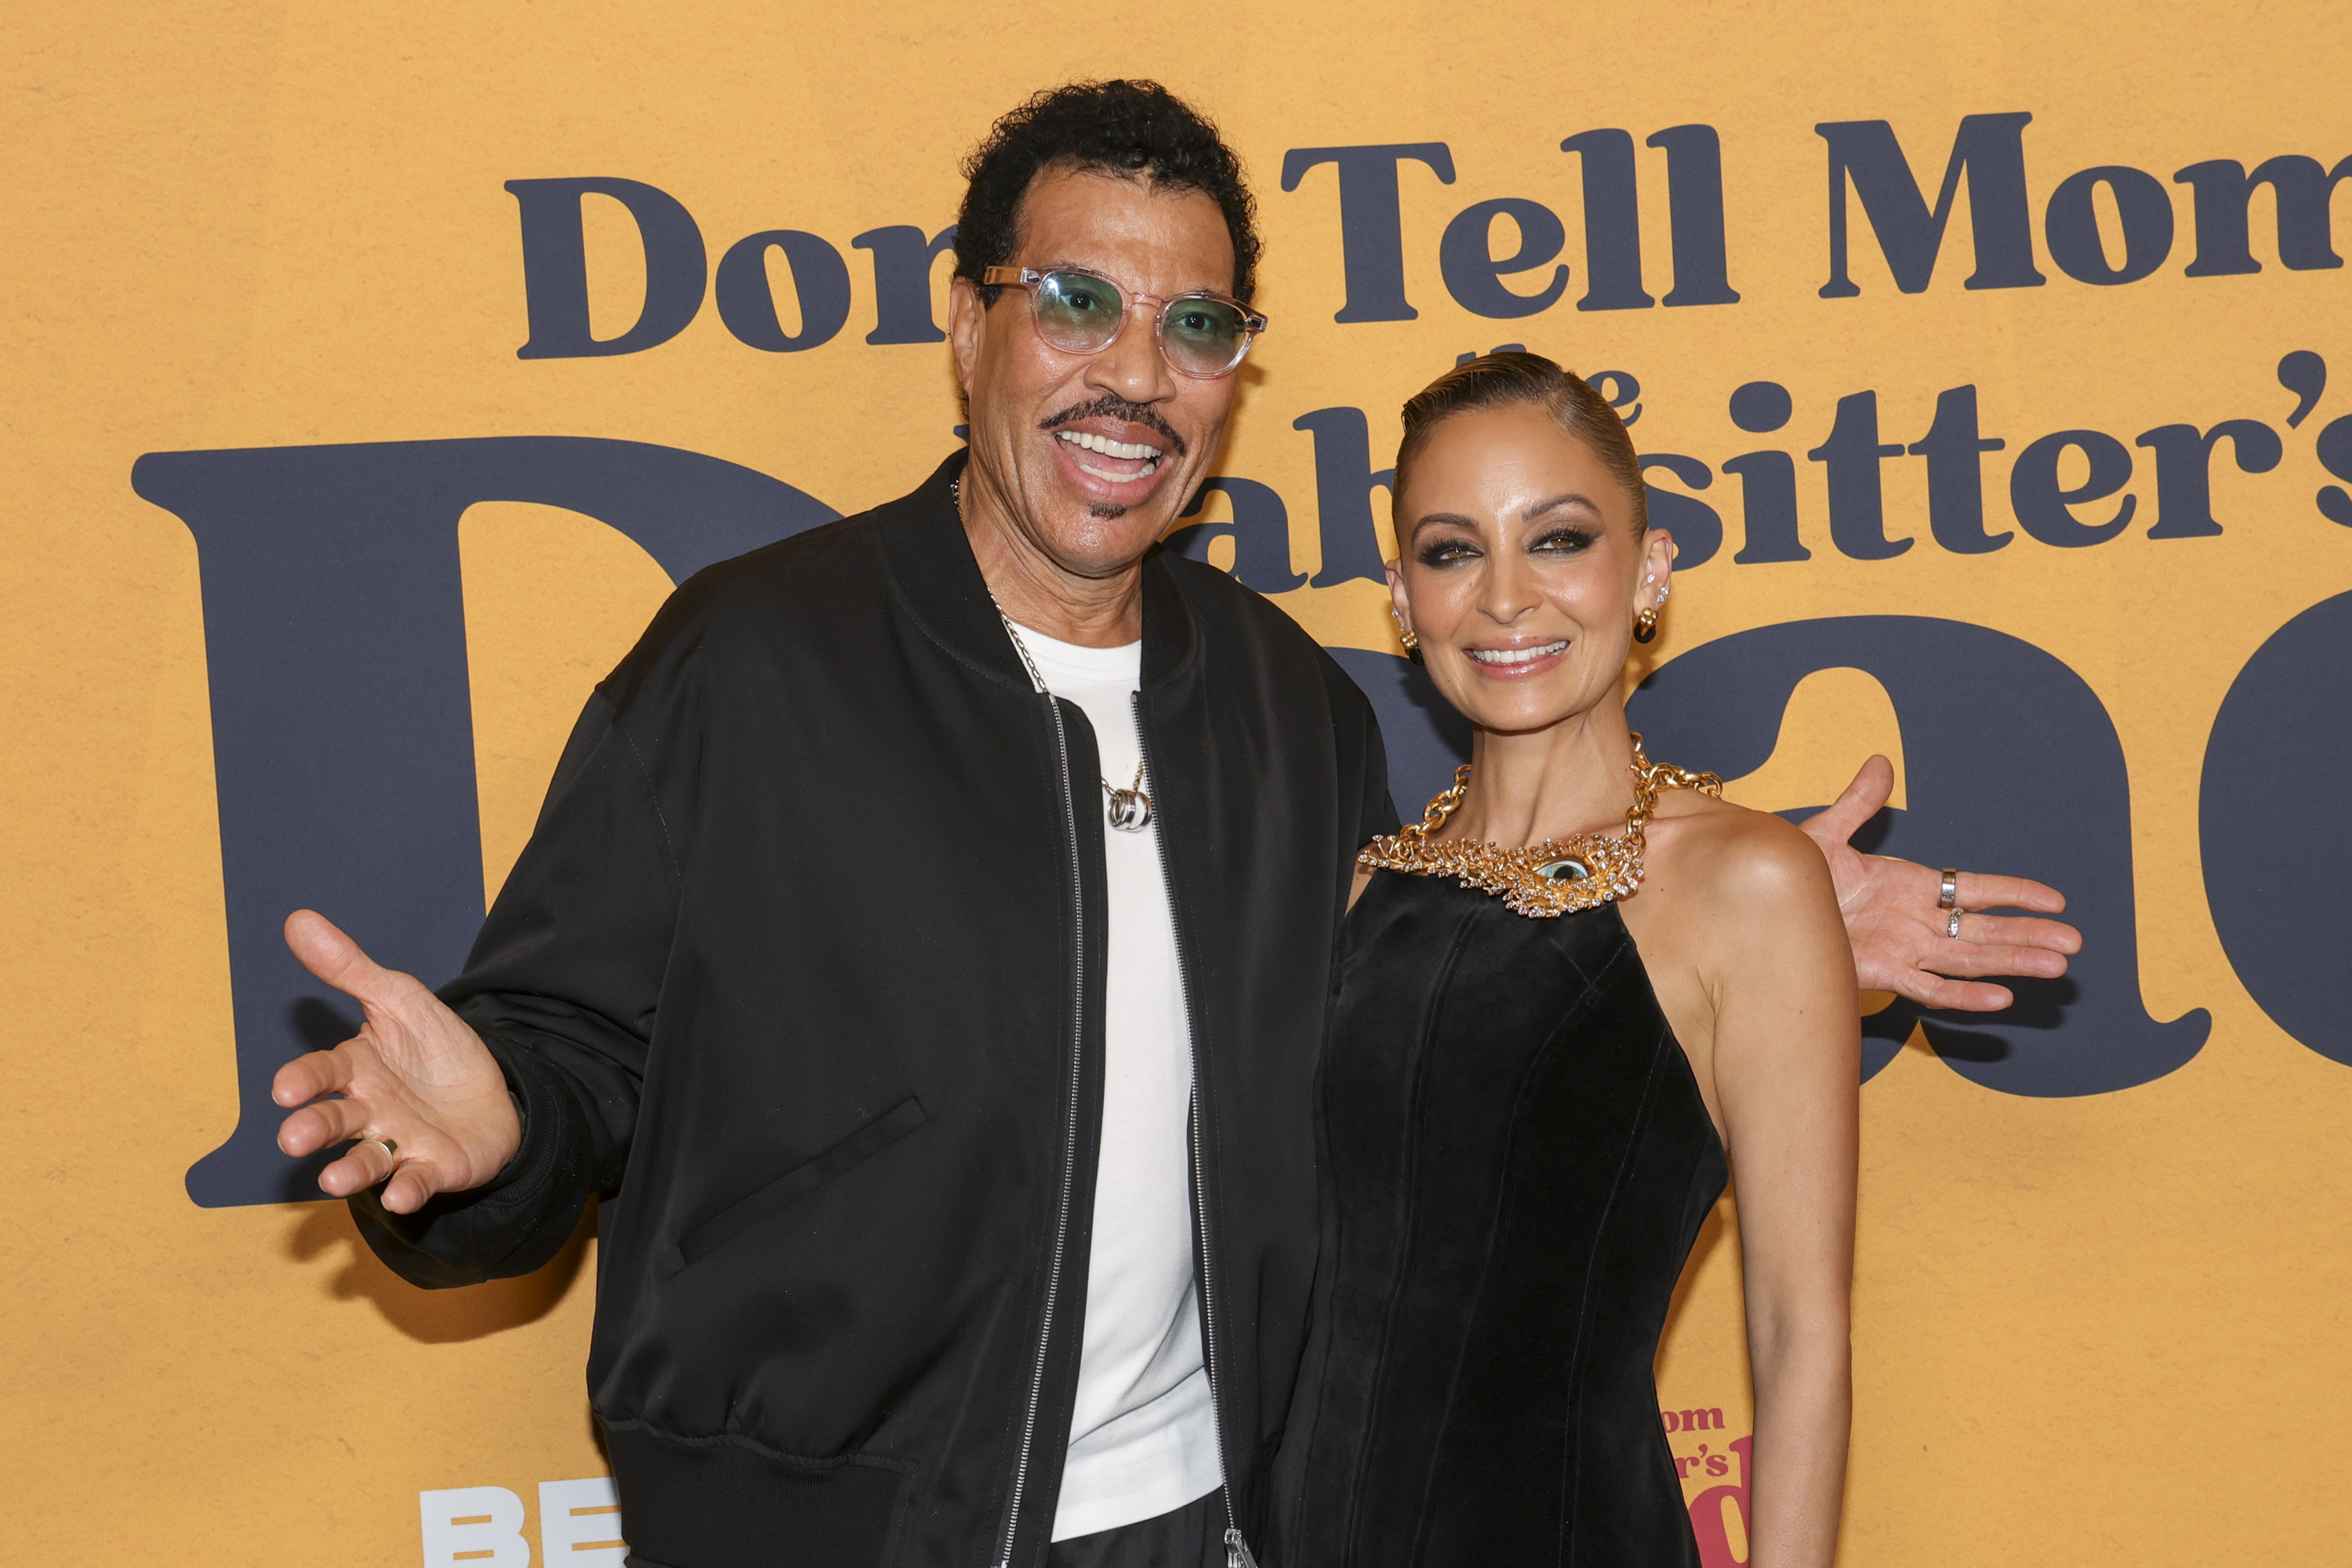 Lionel Richie and Nicole Richie at the premiere of "Don't Tell Mom the Babysitter's Dead," 2024 | Source: Getty Images